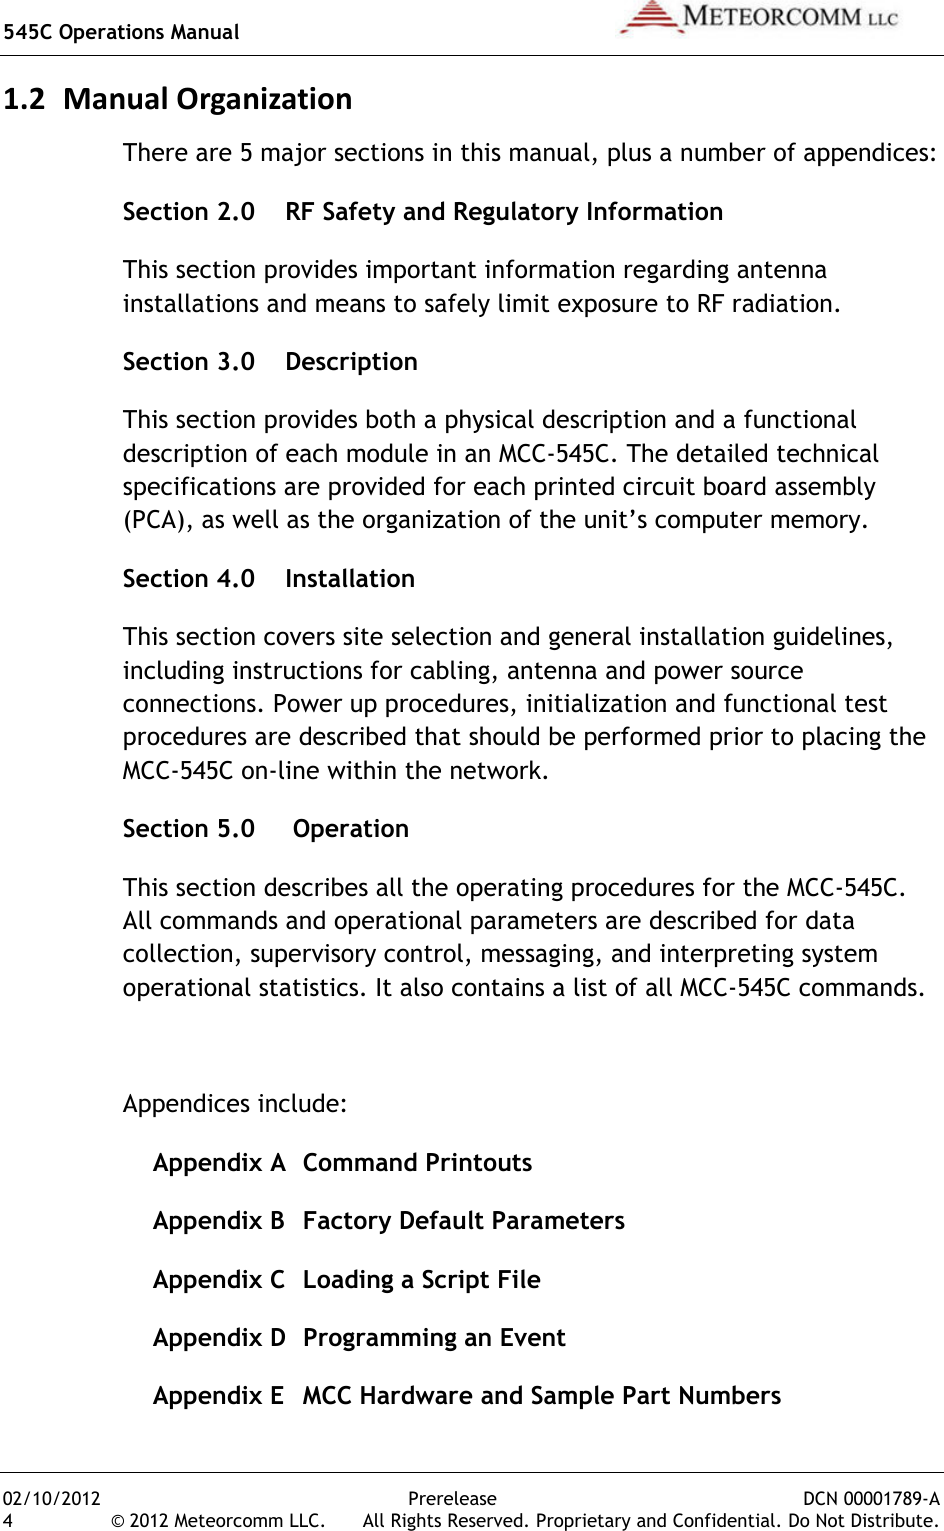 545C Operations Manual   02/10/2012  Prerelease  DCN 00001789-A 4  © 2012 Meteorcomm LLC.   All Rights Reserved. Proprietary and Confidential. Do Not Distribute. 1.2 Manual Organization There are 5 major sections in this manual, plus a number of appendices: Section 2.0    RF Safety and Regulatory Information This section provides important information regarding antenna installations and means to safely limit exposure to RF radiation. Section 3.0    Description This section provides both a physical description and a functional description of each module in an MCC-545C. The detailed technical specifications are provided for each printed circuit board assembly (PCA), as well as the organization of the unit’s computer memory. Section 4.0    Installation This section covers site selection and general installation guidelines, including instructions for cabling, antenna and power source connections. Power up procedures, initialization and functional test procedures are described that should be performed prior to placing the MCC-545C on-line within the network. Section 5.0     Operation This section describes all the operating procedures for the MCC-545C. All commands and operational parameters are described for data collection, supervisory control, messaging, and interpreting system operational statistics. It also contains a list of all MCC-545C commands.  Appendices include:  Appendix A  Command Printouts   Appendix B  Factory Default Parameters   Appendix C  Loading a Script File   Appendix D  Programming an Event   Appendix E  MCC Hardware and Sample Part Numbers 